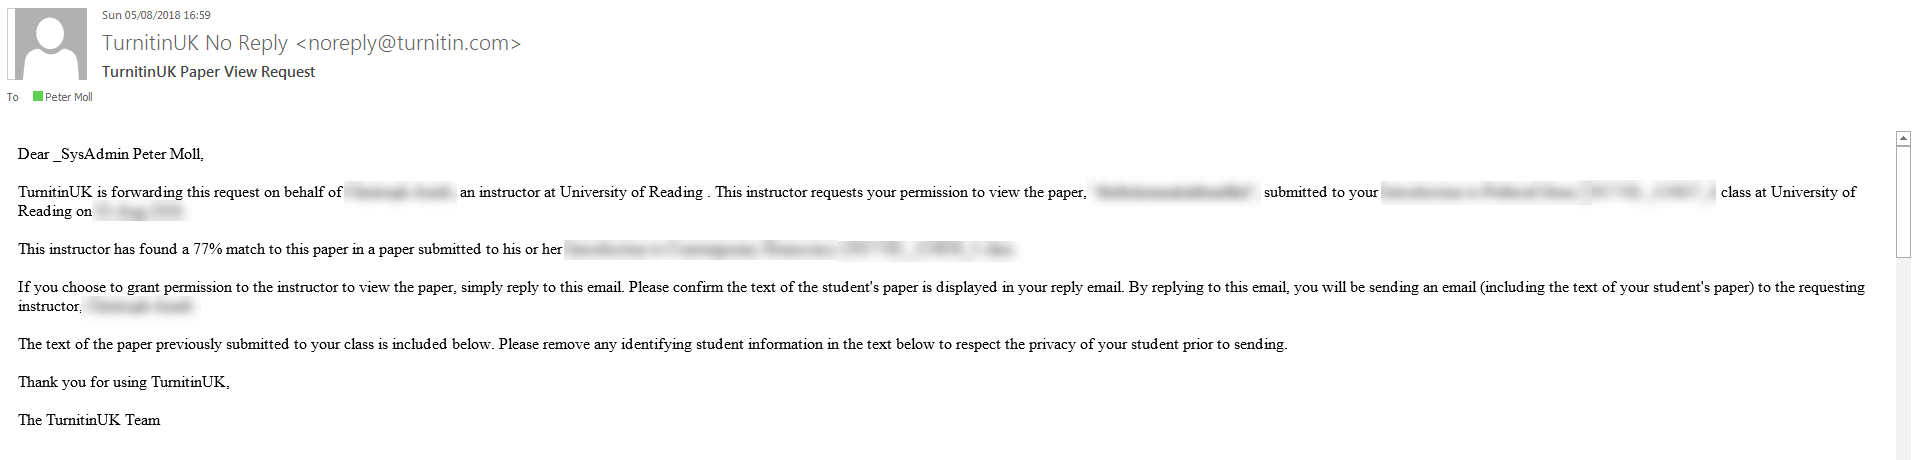 An example of an email request to view a paper